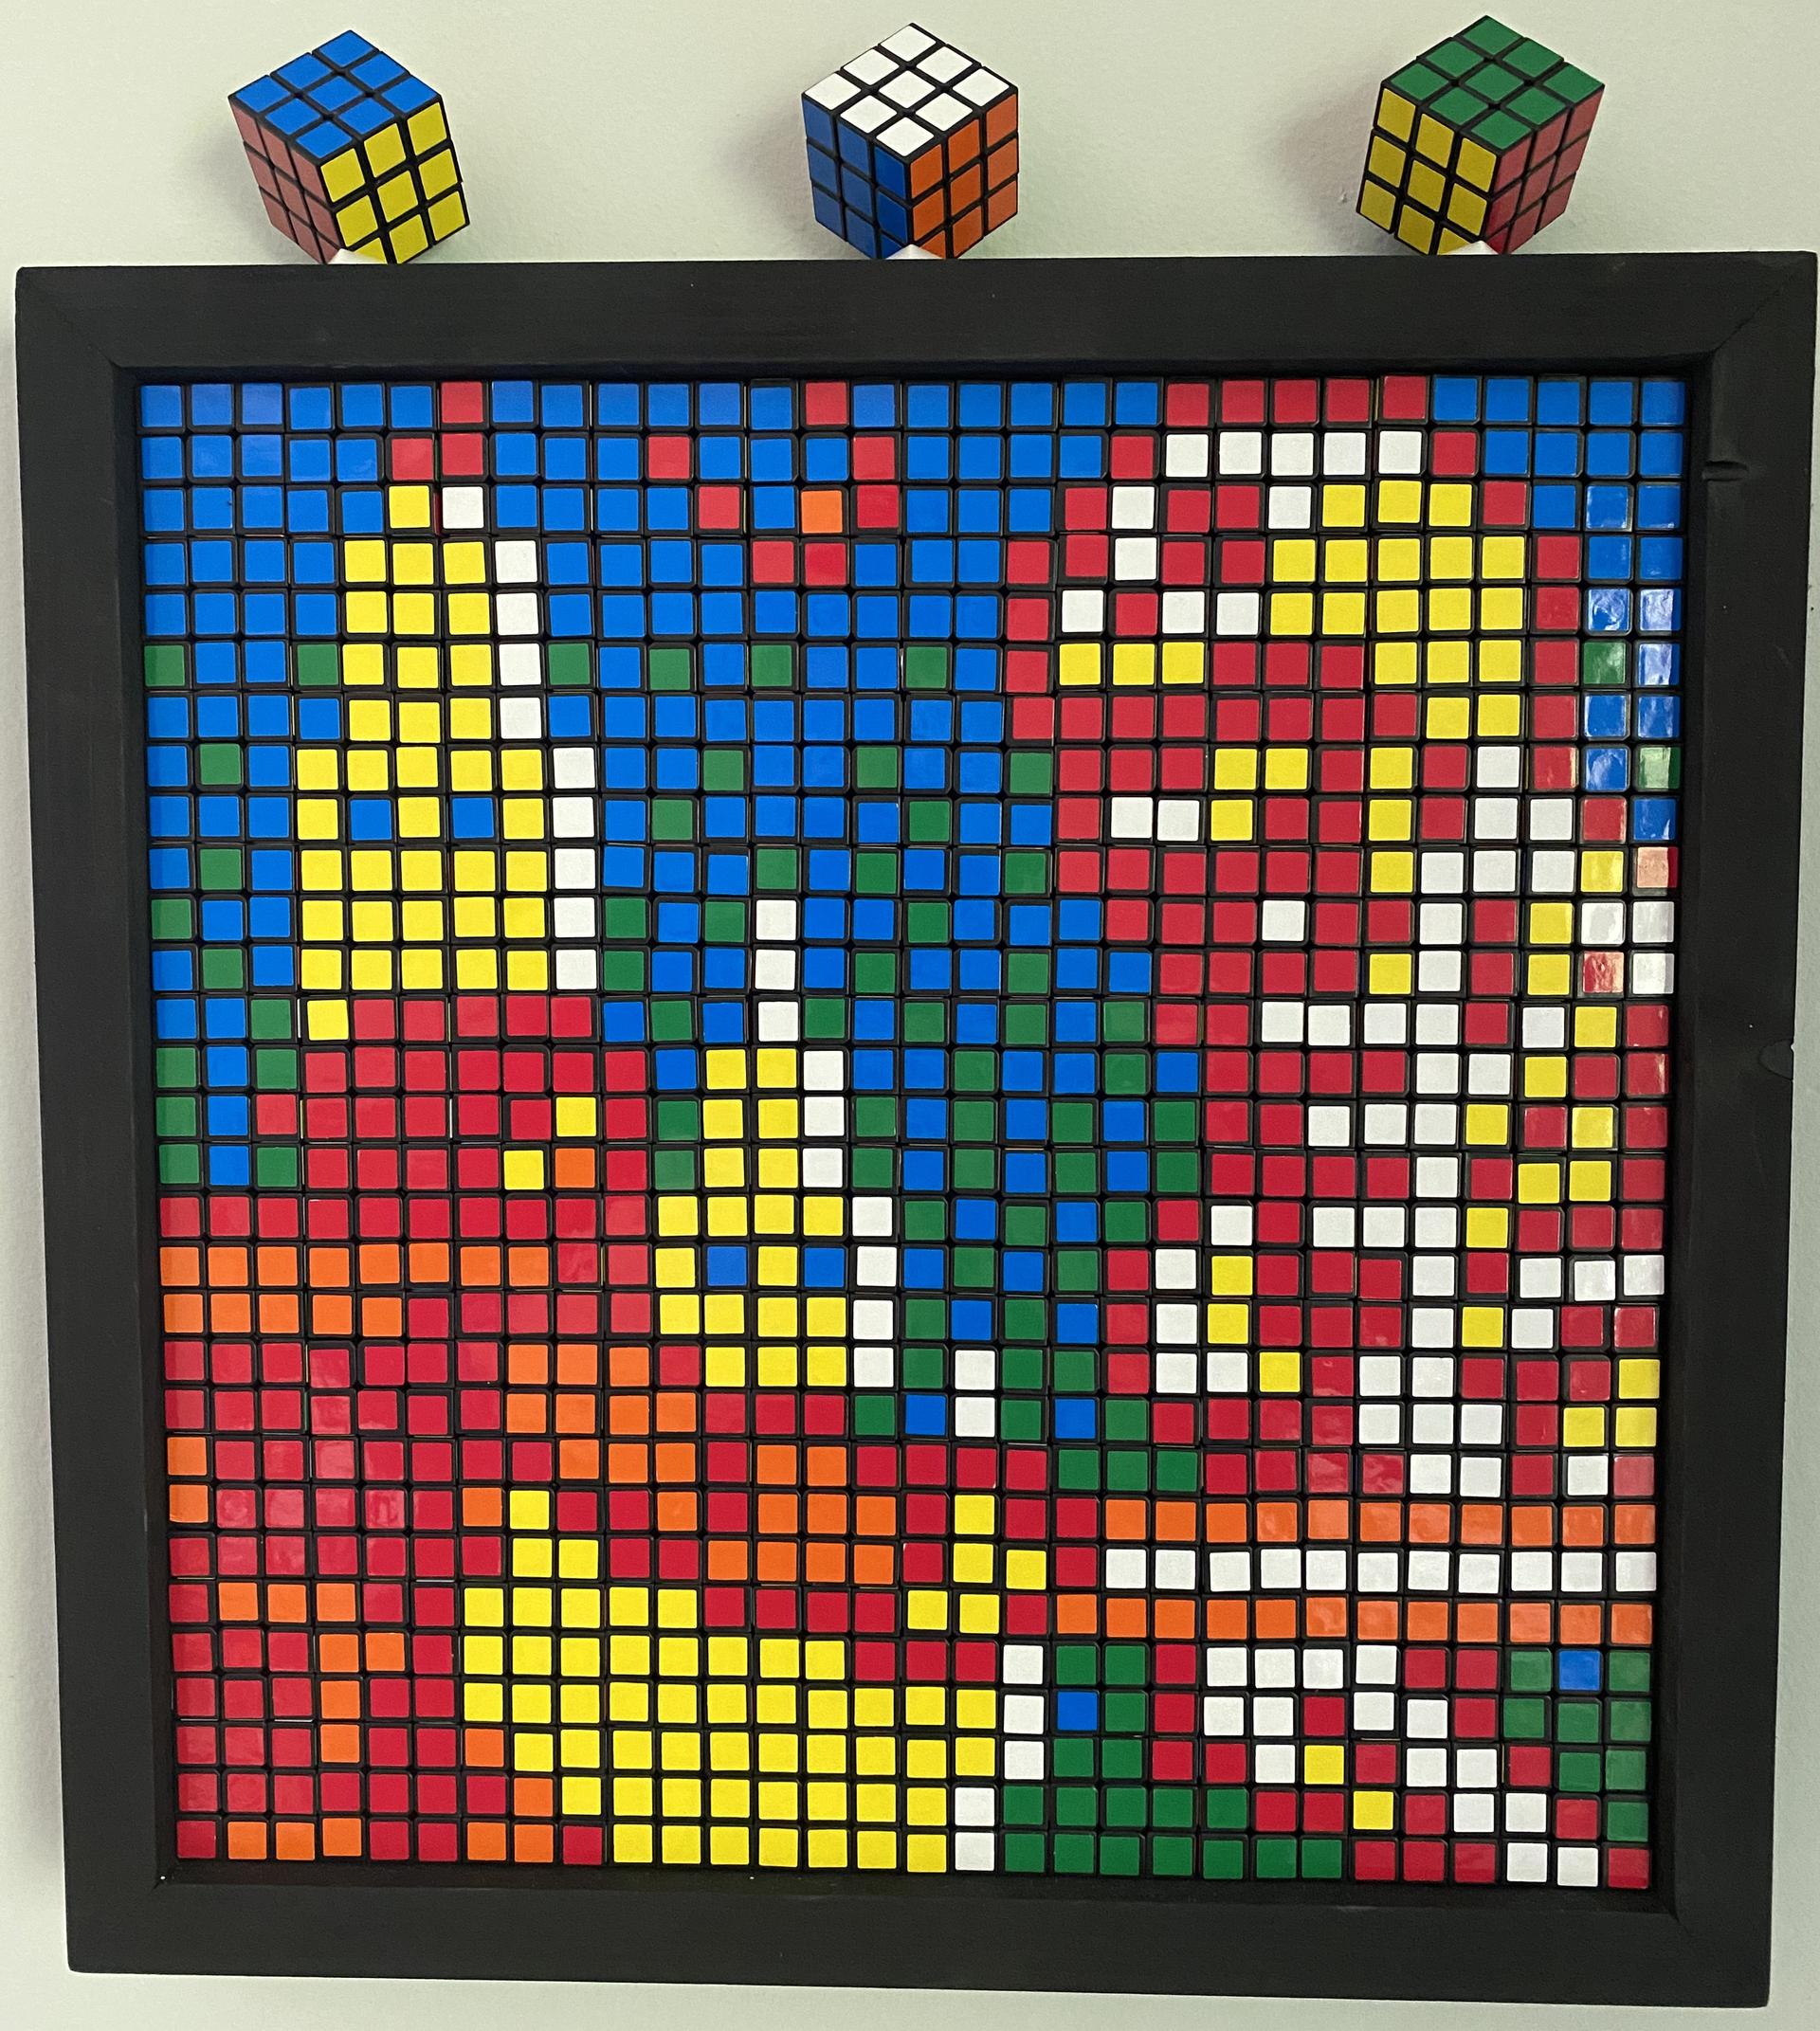 Rubik's cubes as pixel art of Simon Belmont and a red skeleton from Castlevania